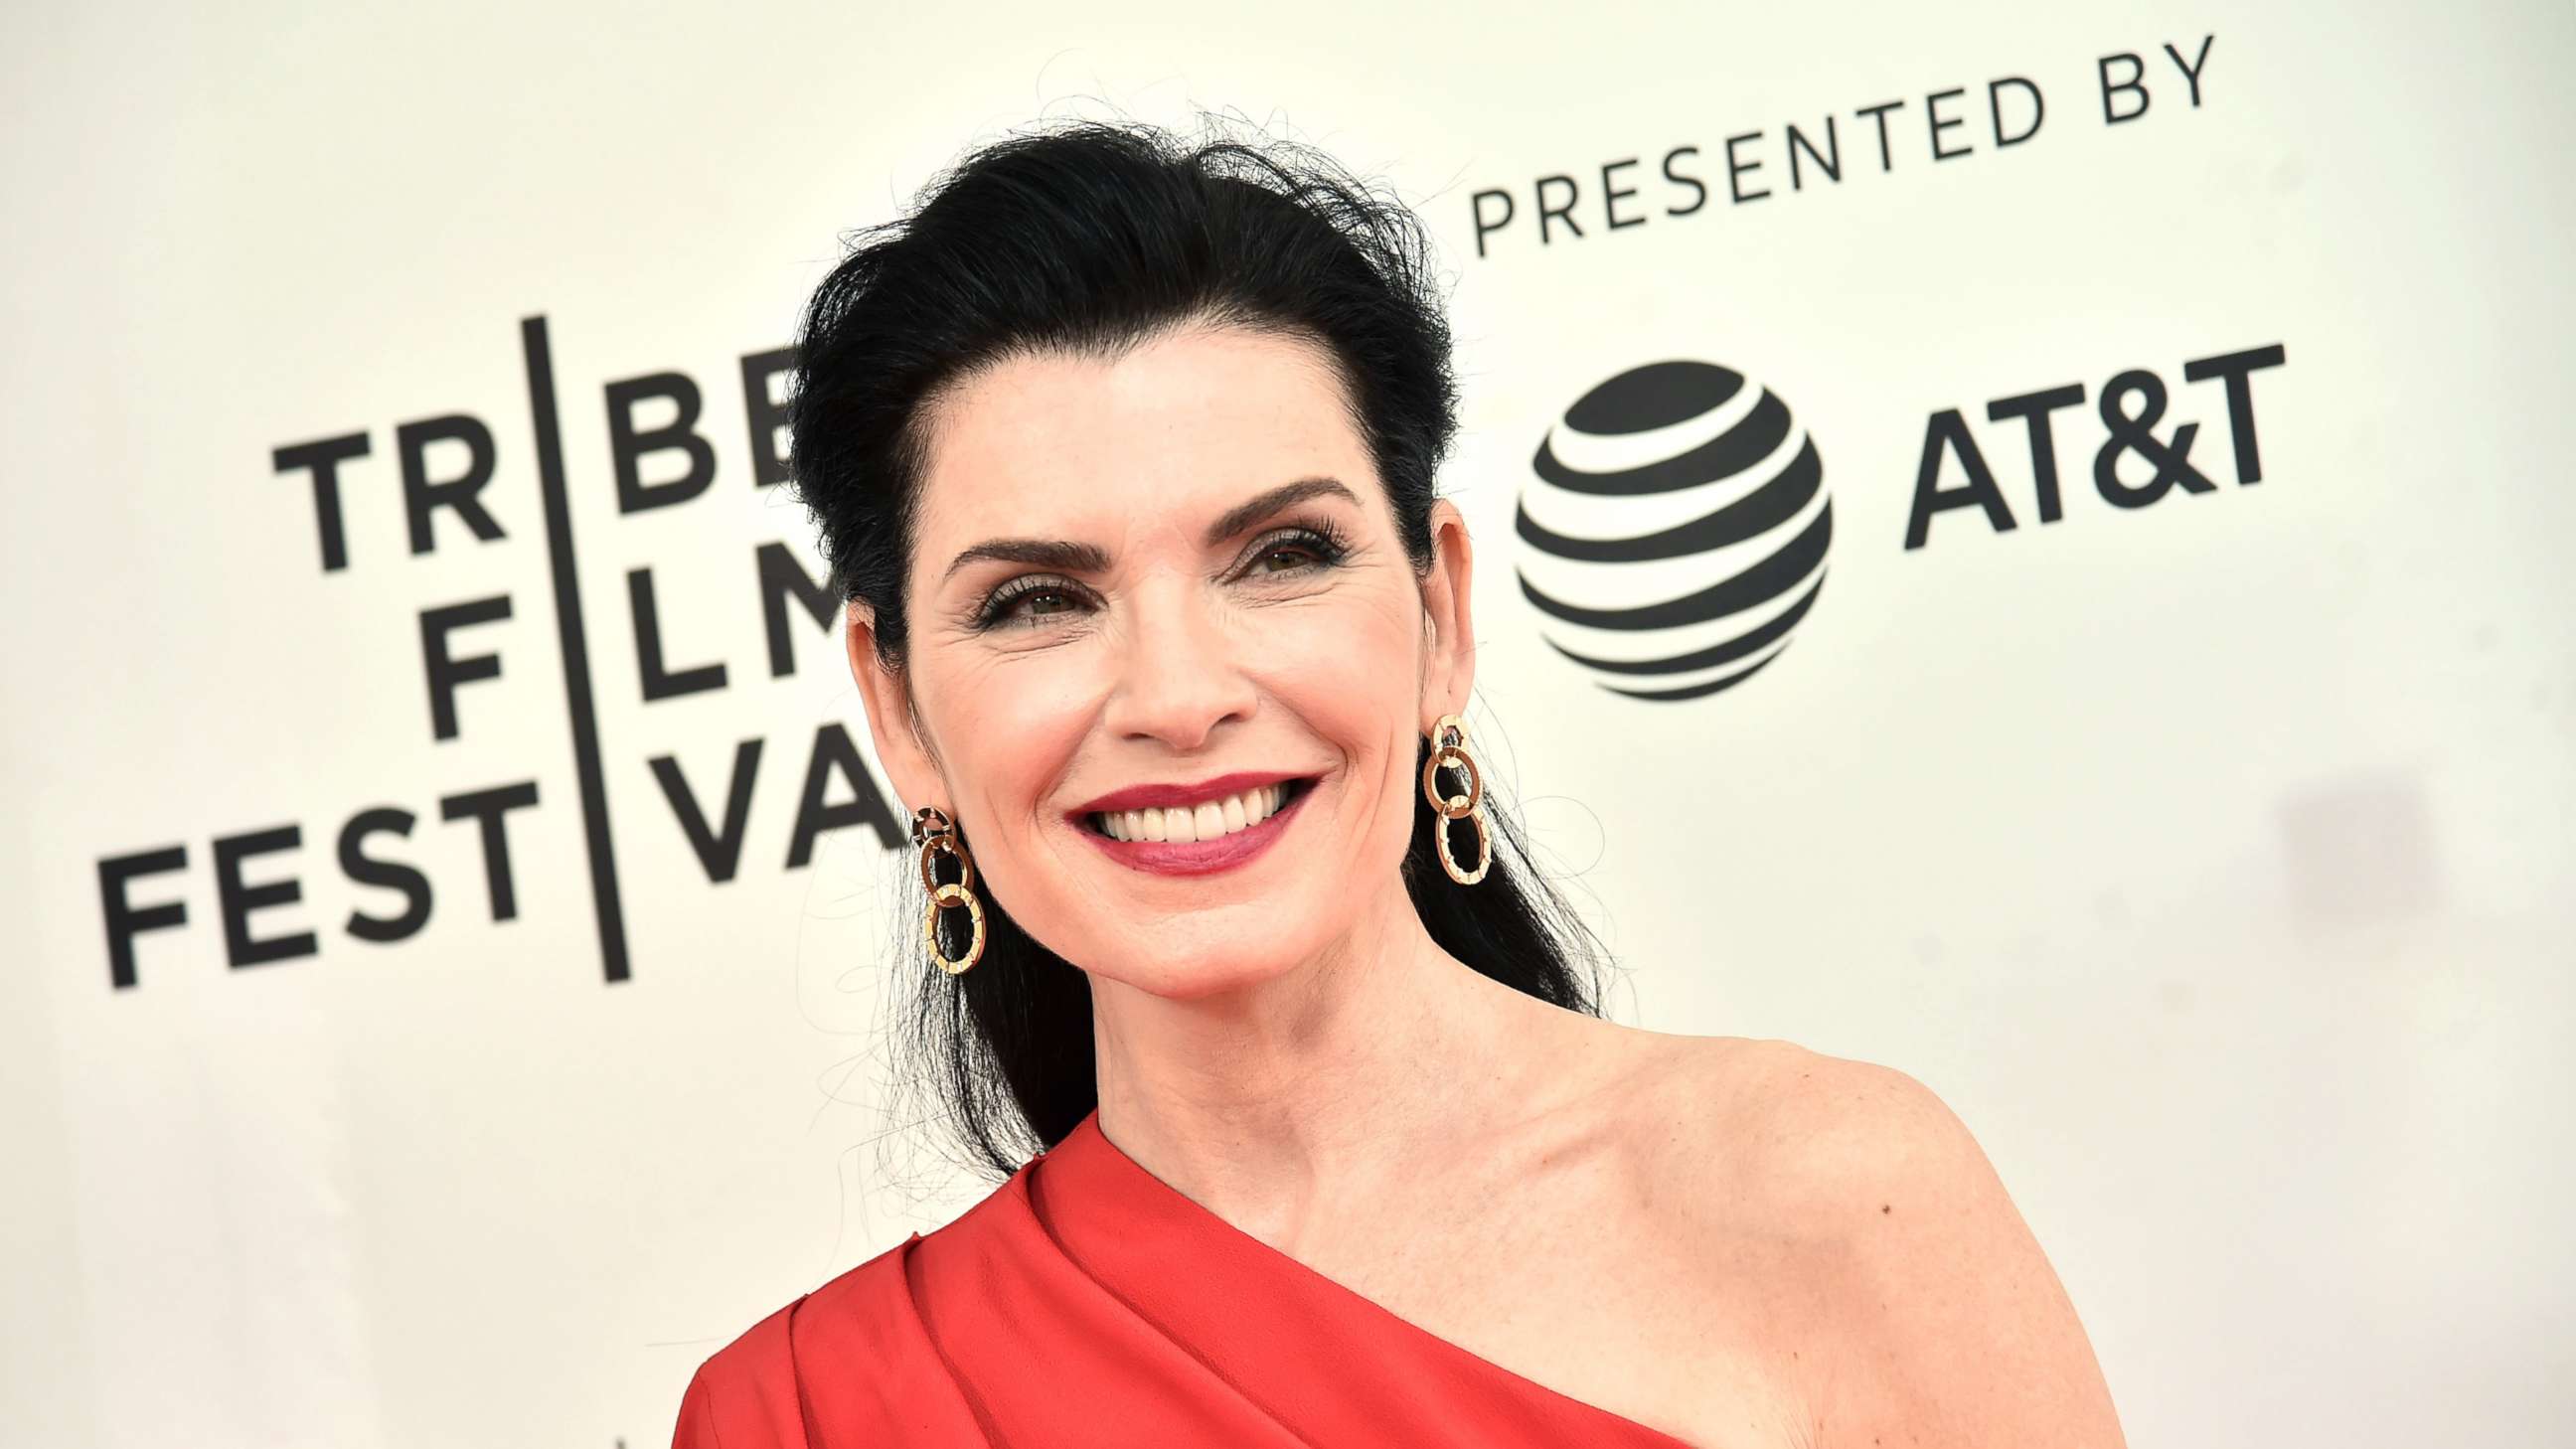 PHOTO: Julianna Margulies attends the 2019 Tribeca Film Festival on April 30, 2019, in New York City.